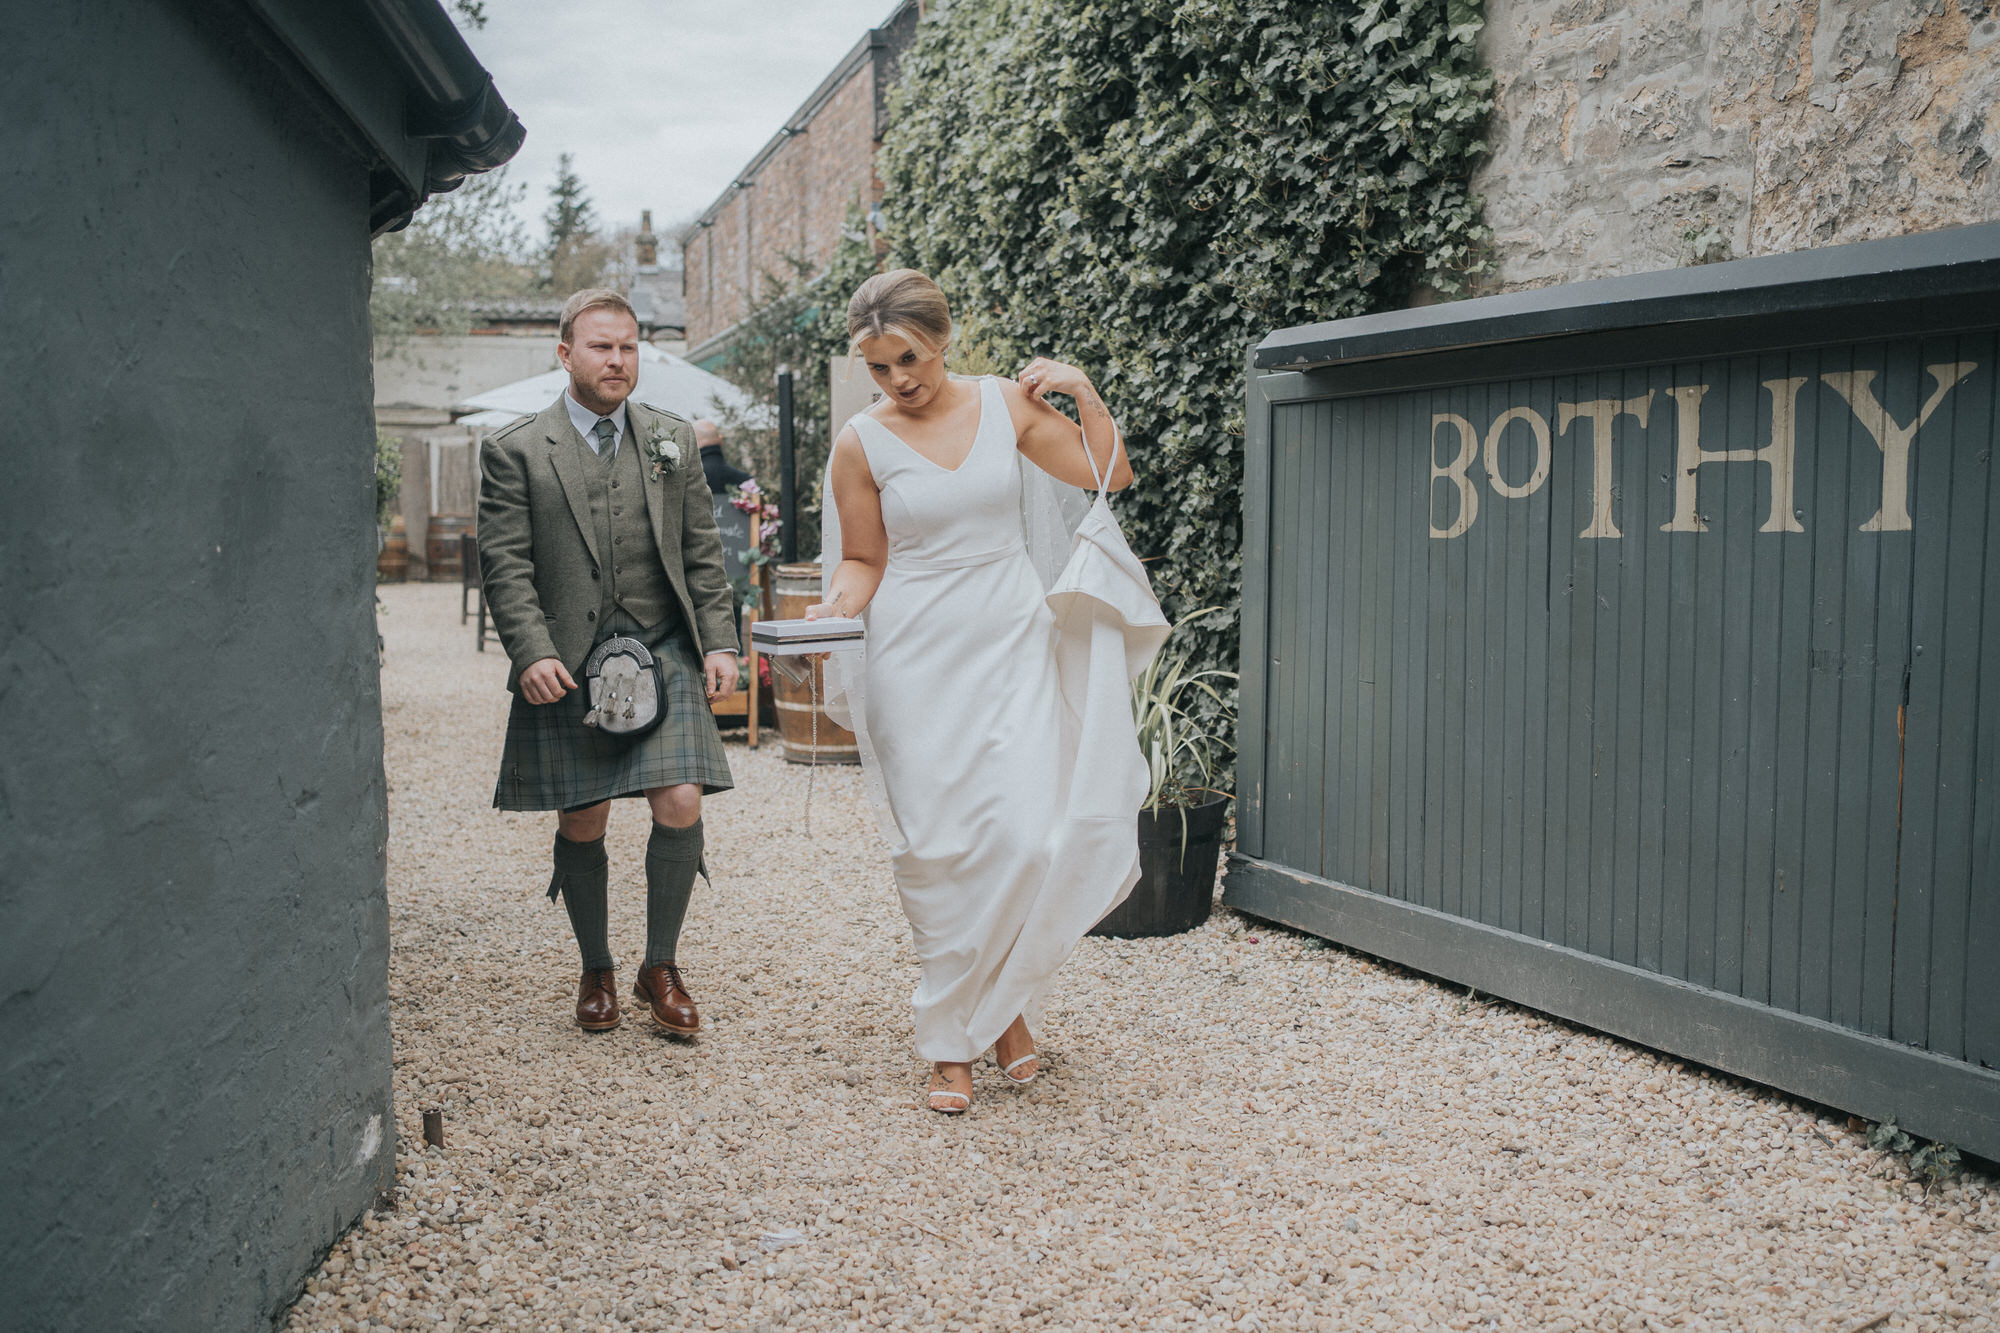 The bride and groom leave at The Bothy, Glasgow